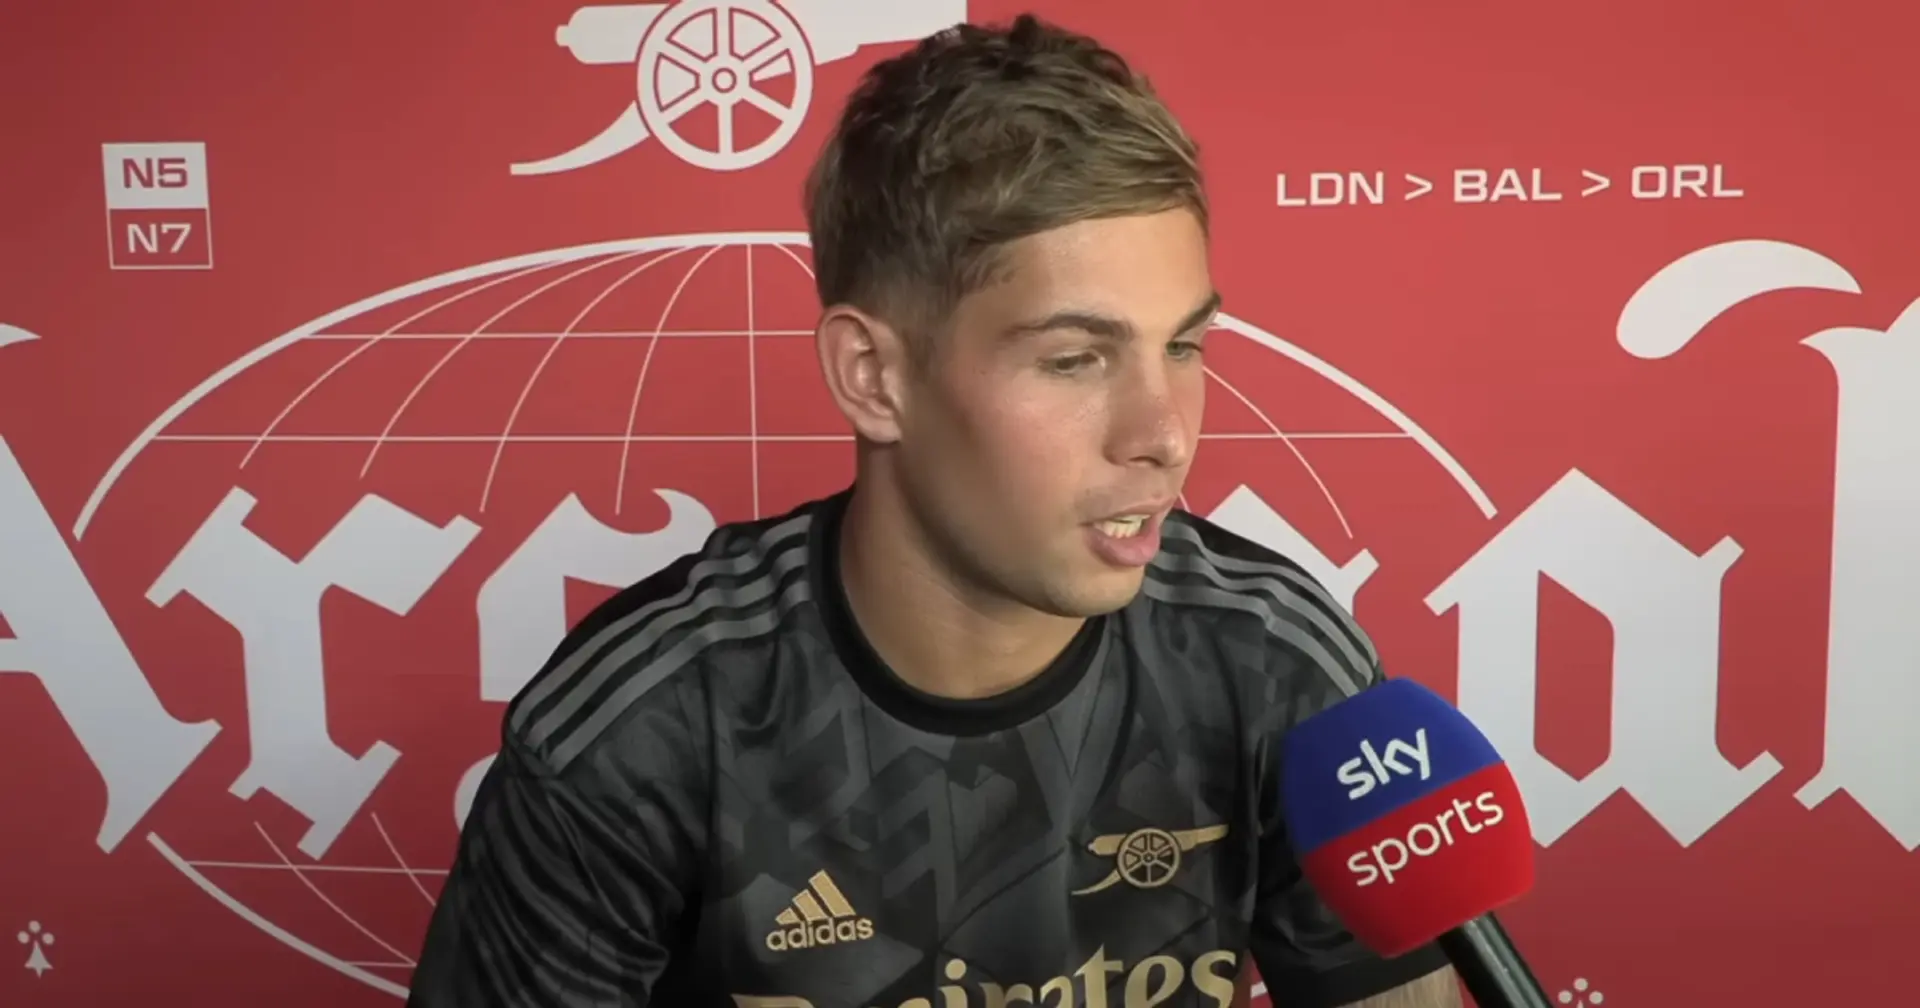 'The whole team was around me': Smith Rowe credits Arsenal teammates and Mikel Arteta with helping him to deal with injury